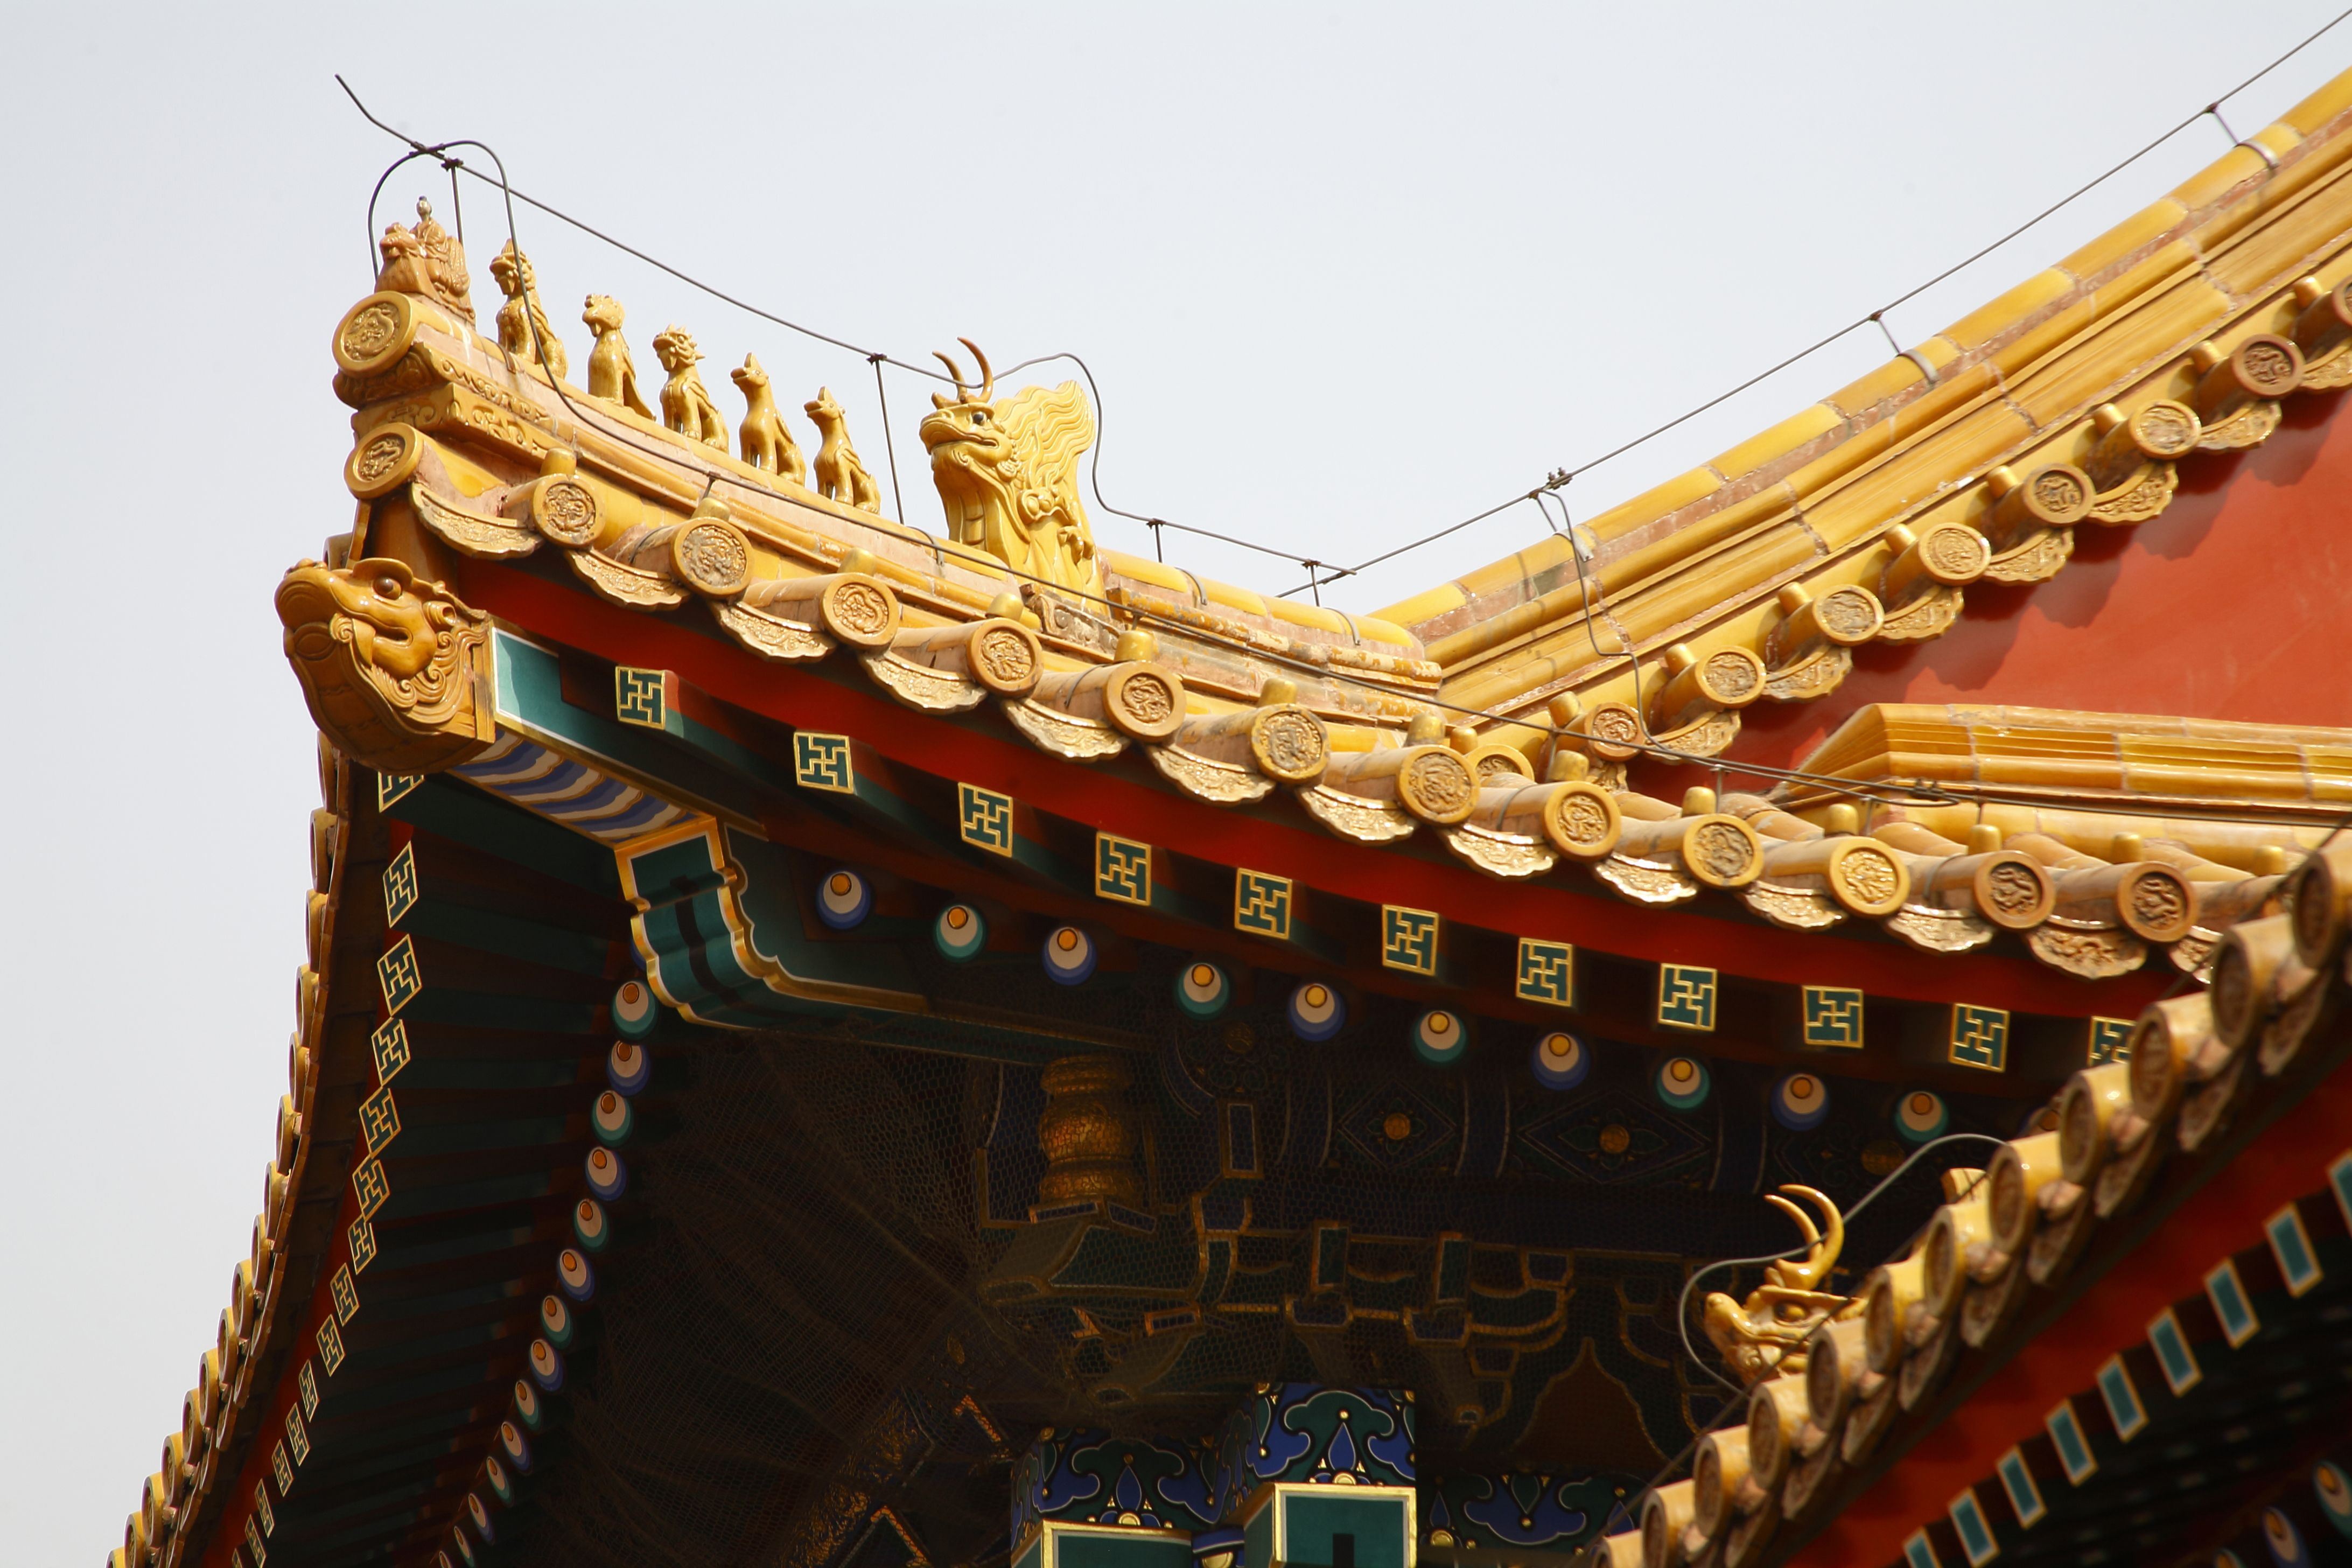 History of the Forbidden City — 1402 to the Present